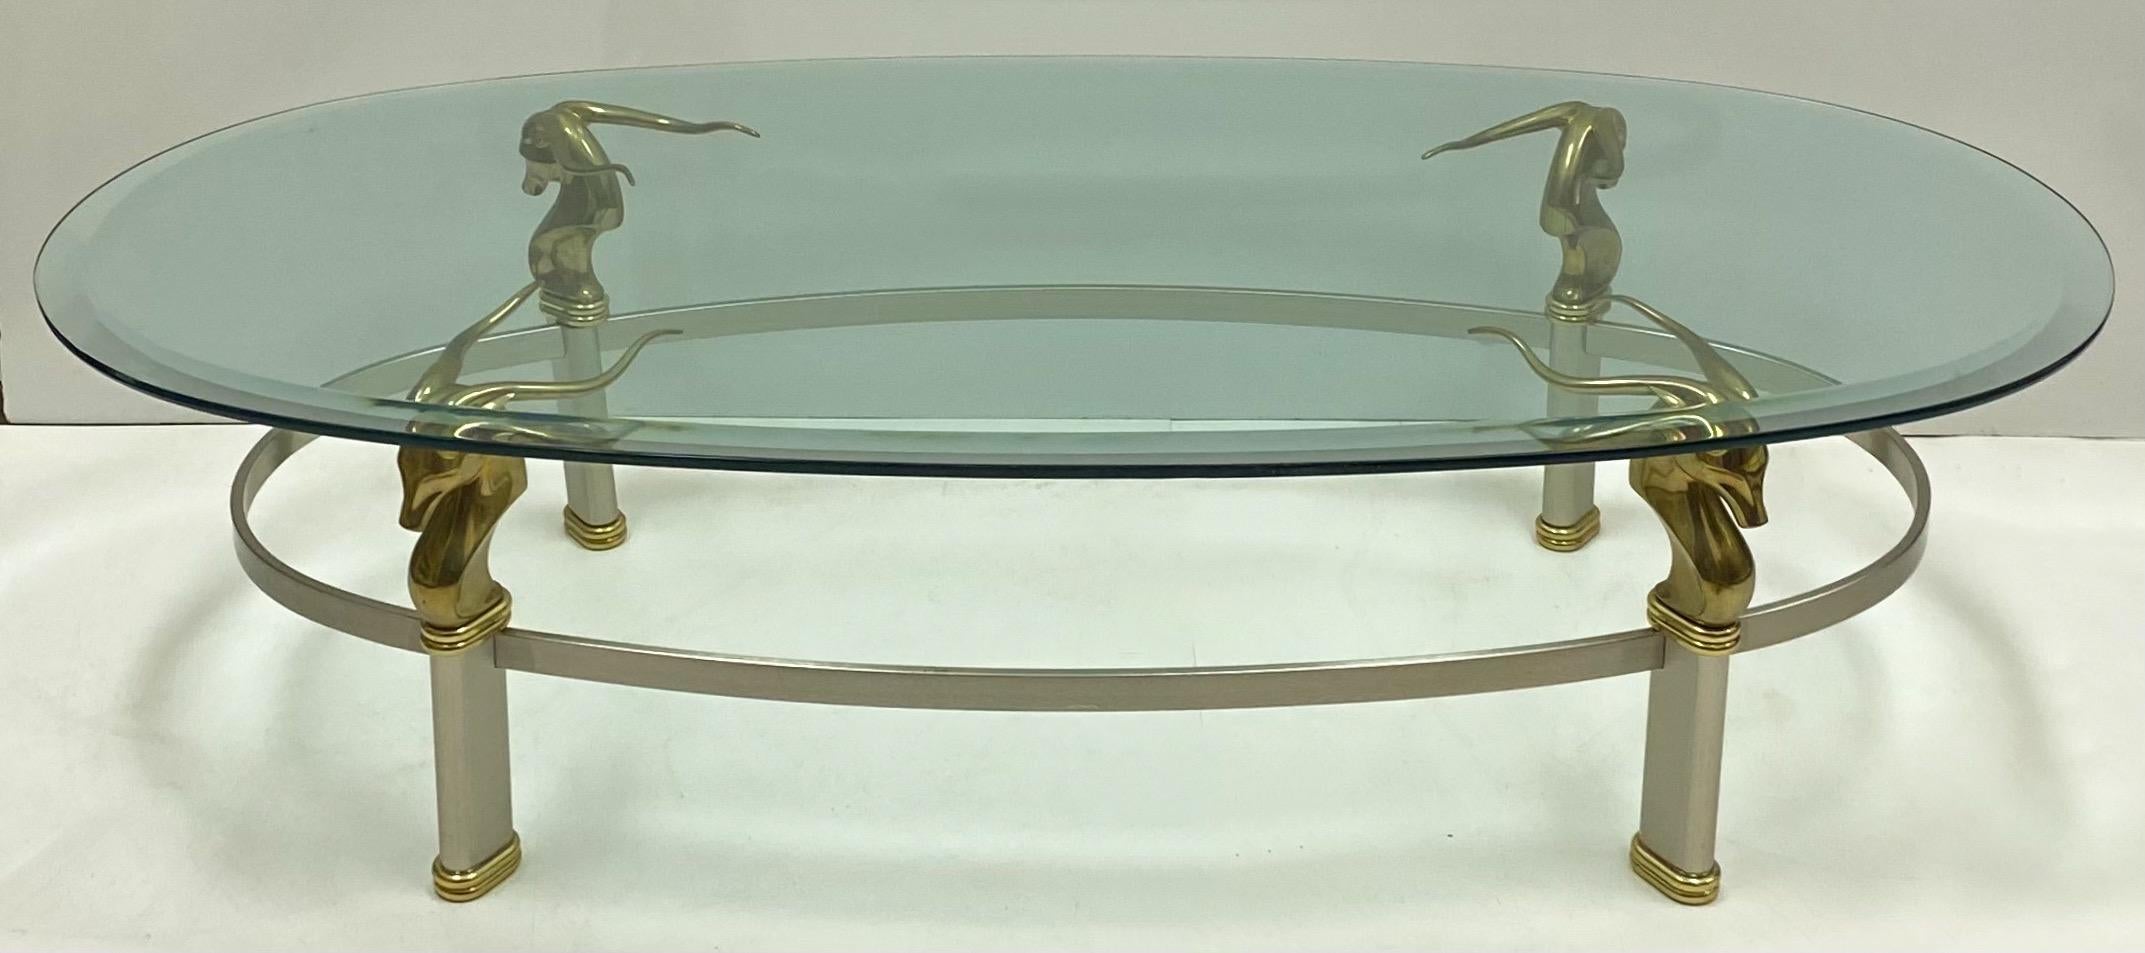 1970s Neoclassical Style Italian Brass, Steel, and Glass Coffee Table 1